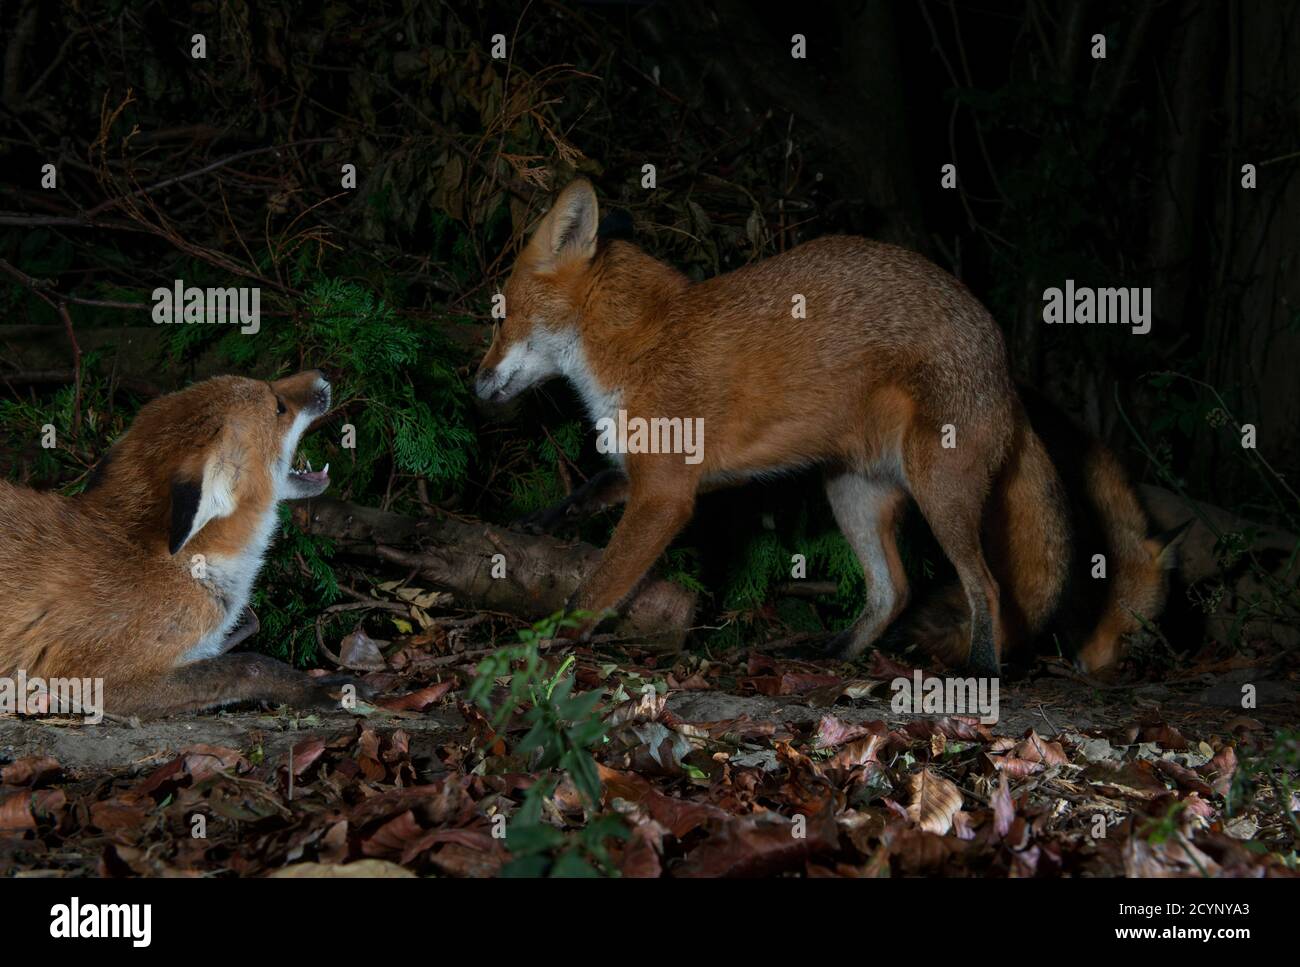 Two foxes with one of them warning off the other, one showing aggression and one submissive Stock Photo